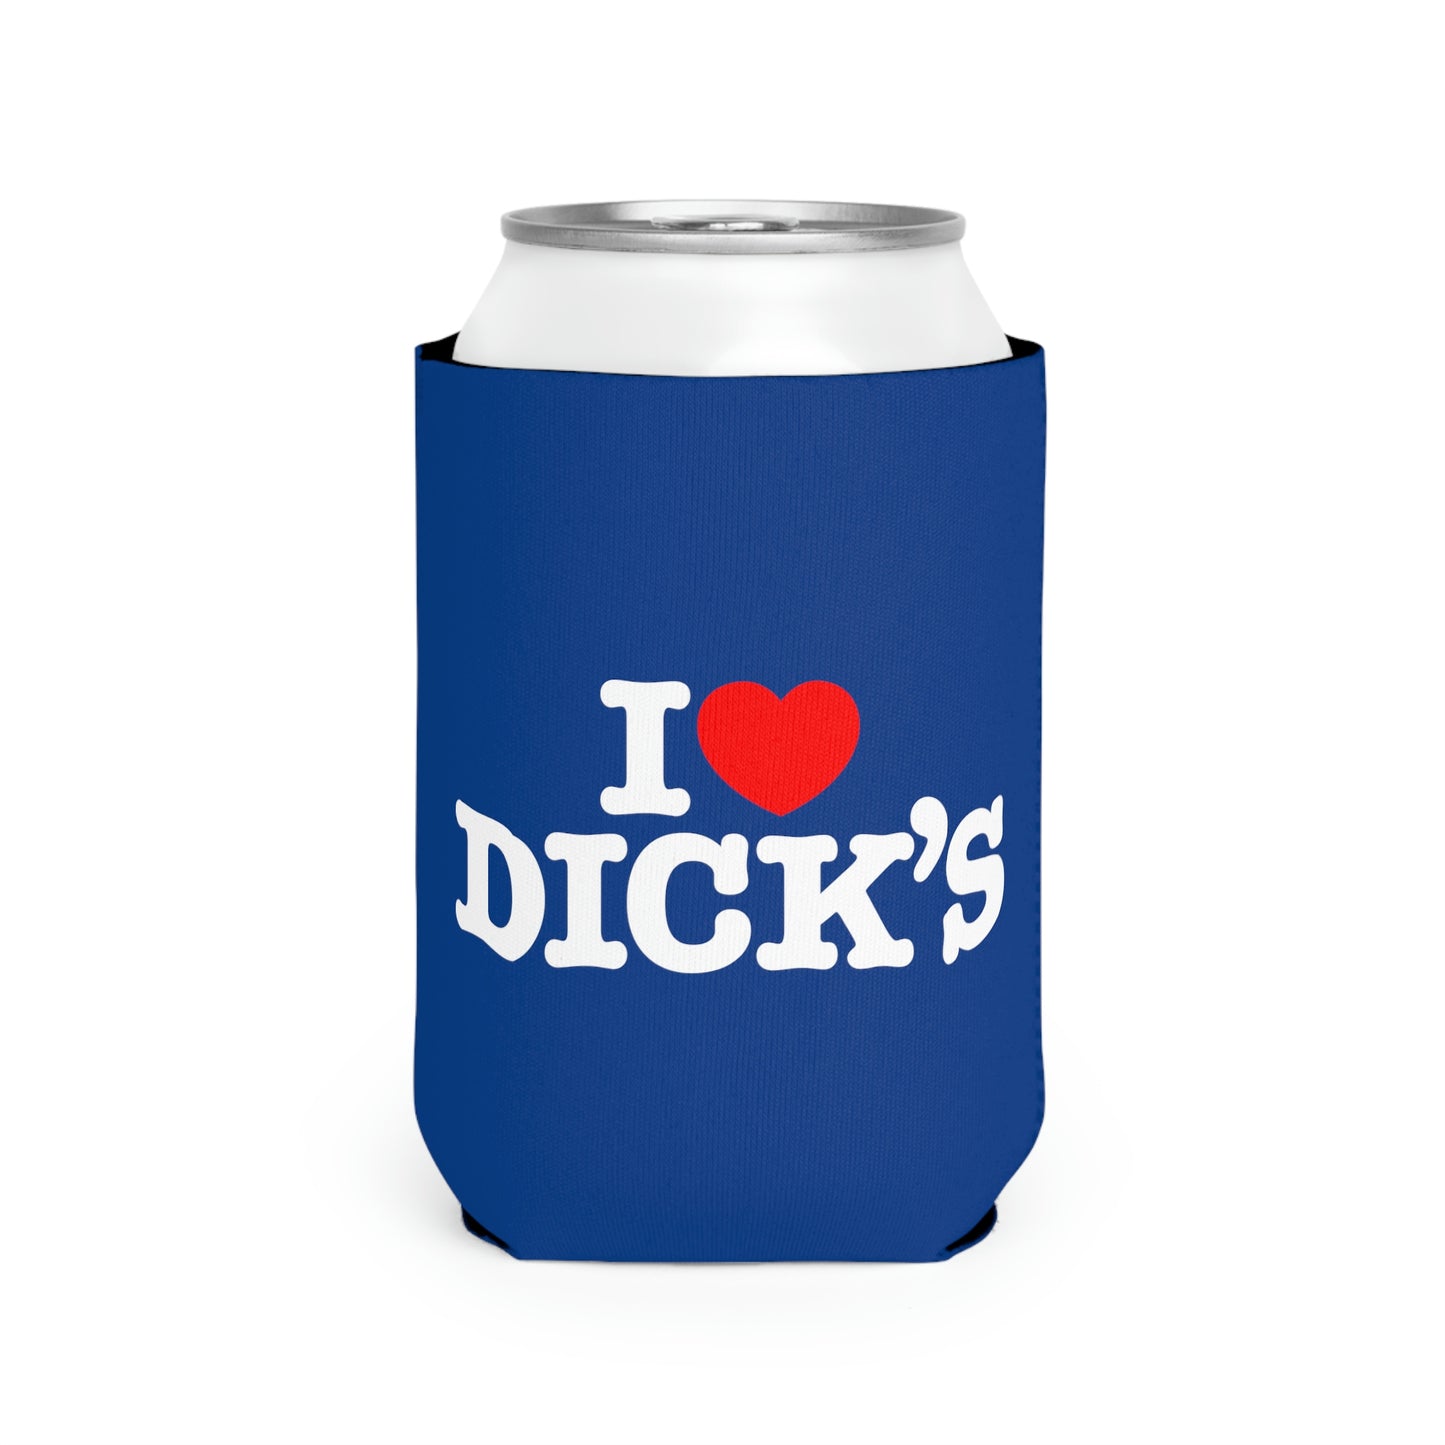 I Love Dick's Can Sleeve